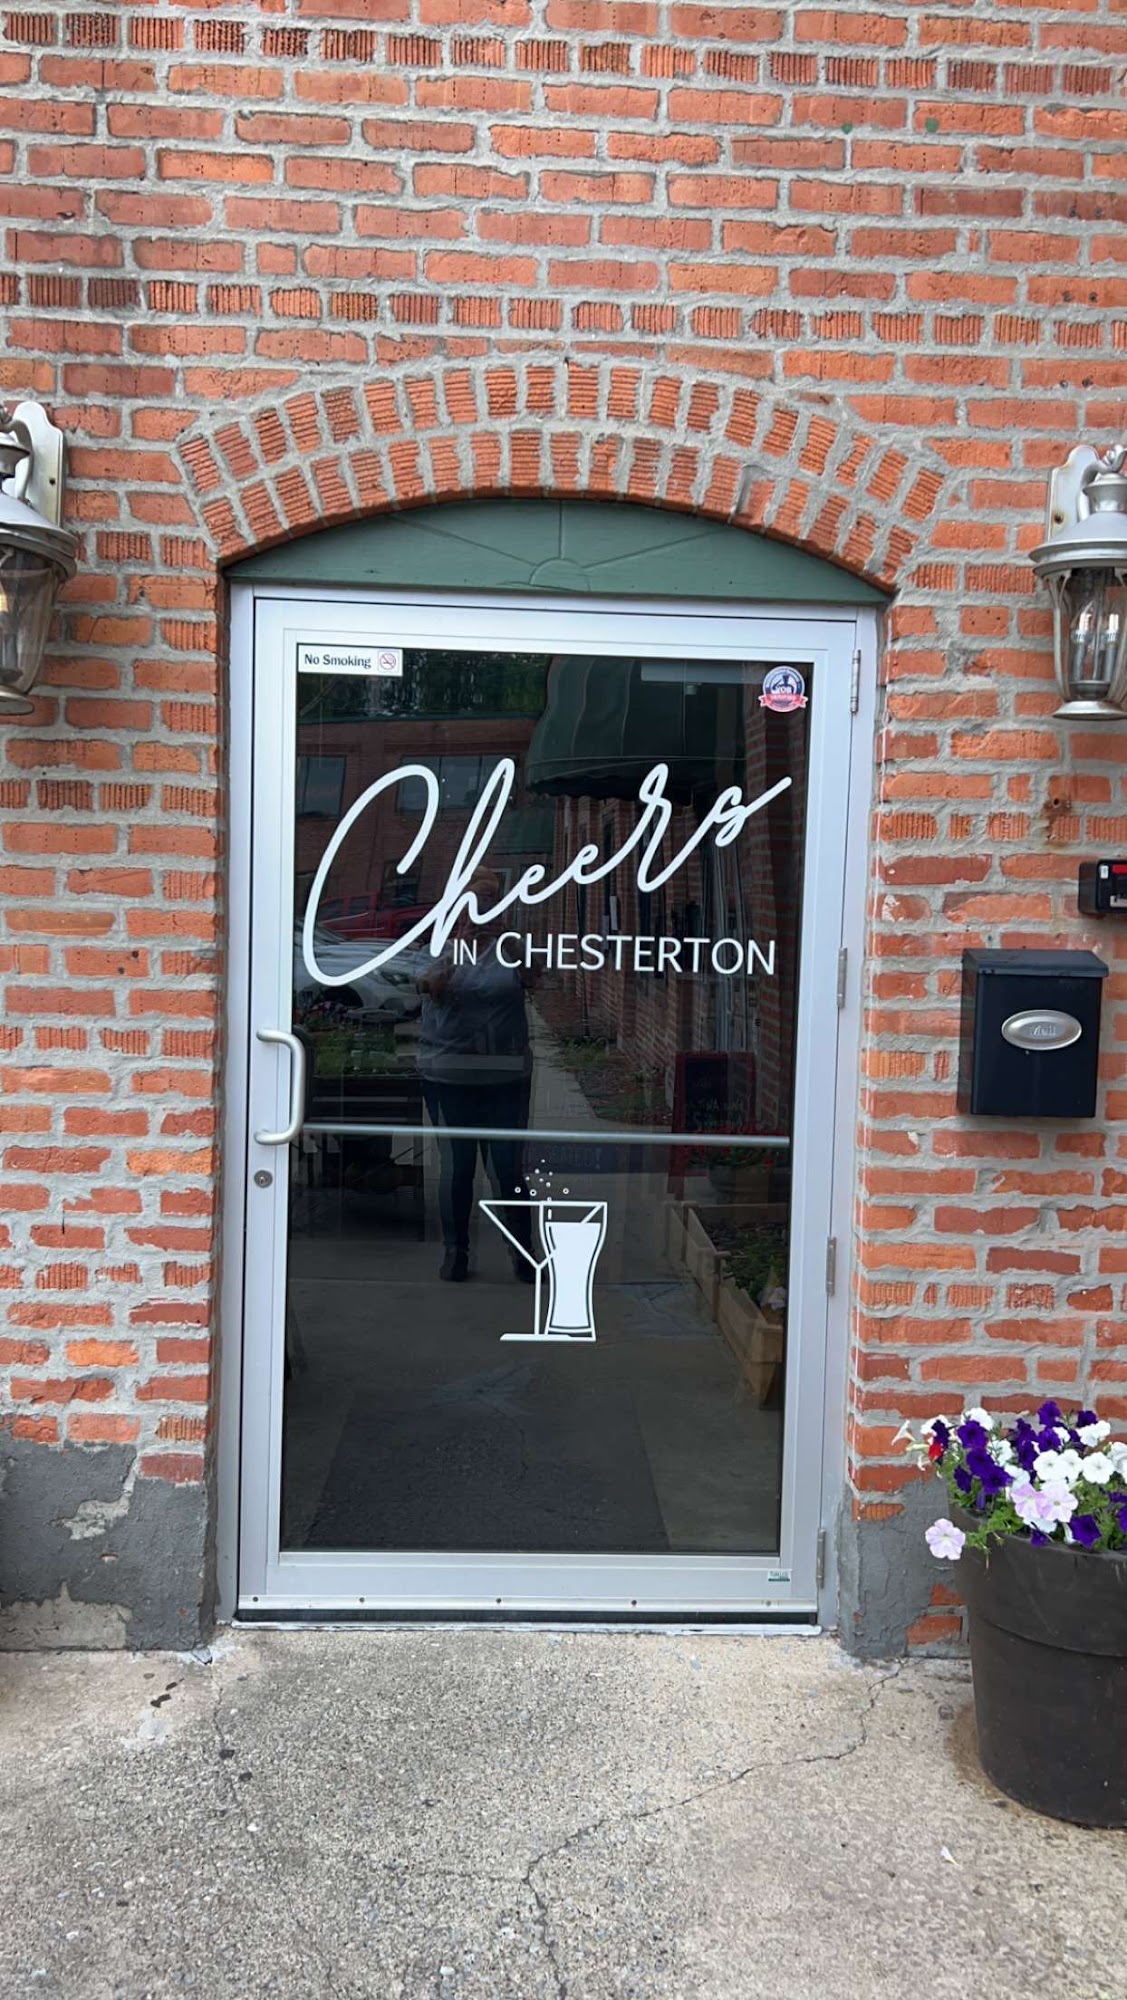 Cheers! In Chesterton 1050 Broadway Ave #36, Chesterton, IN 46304